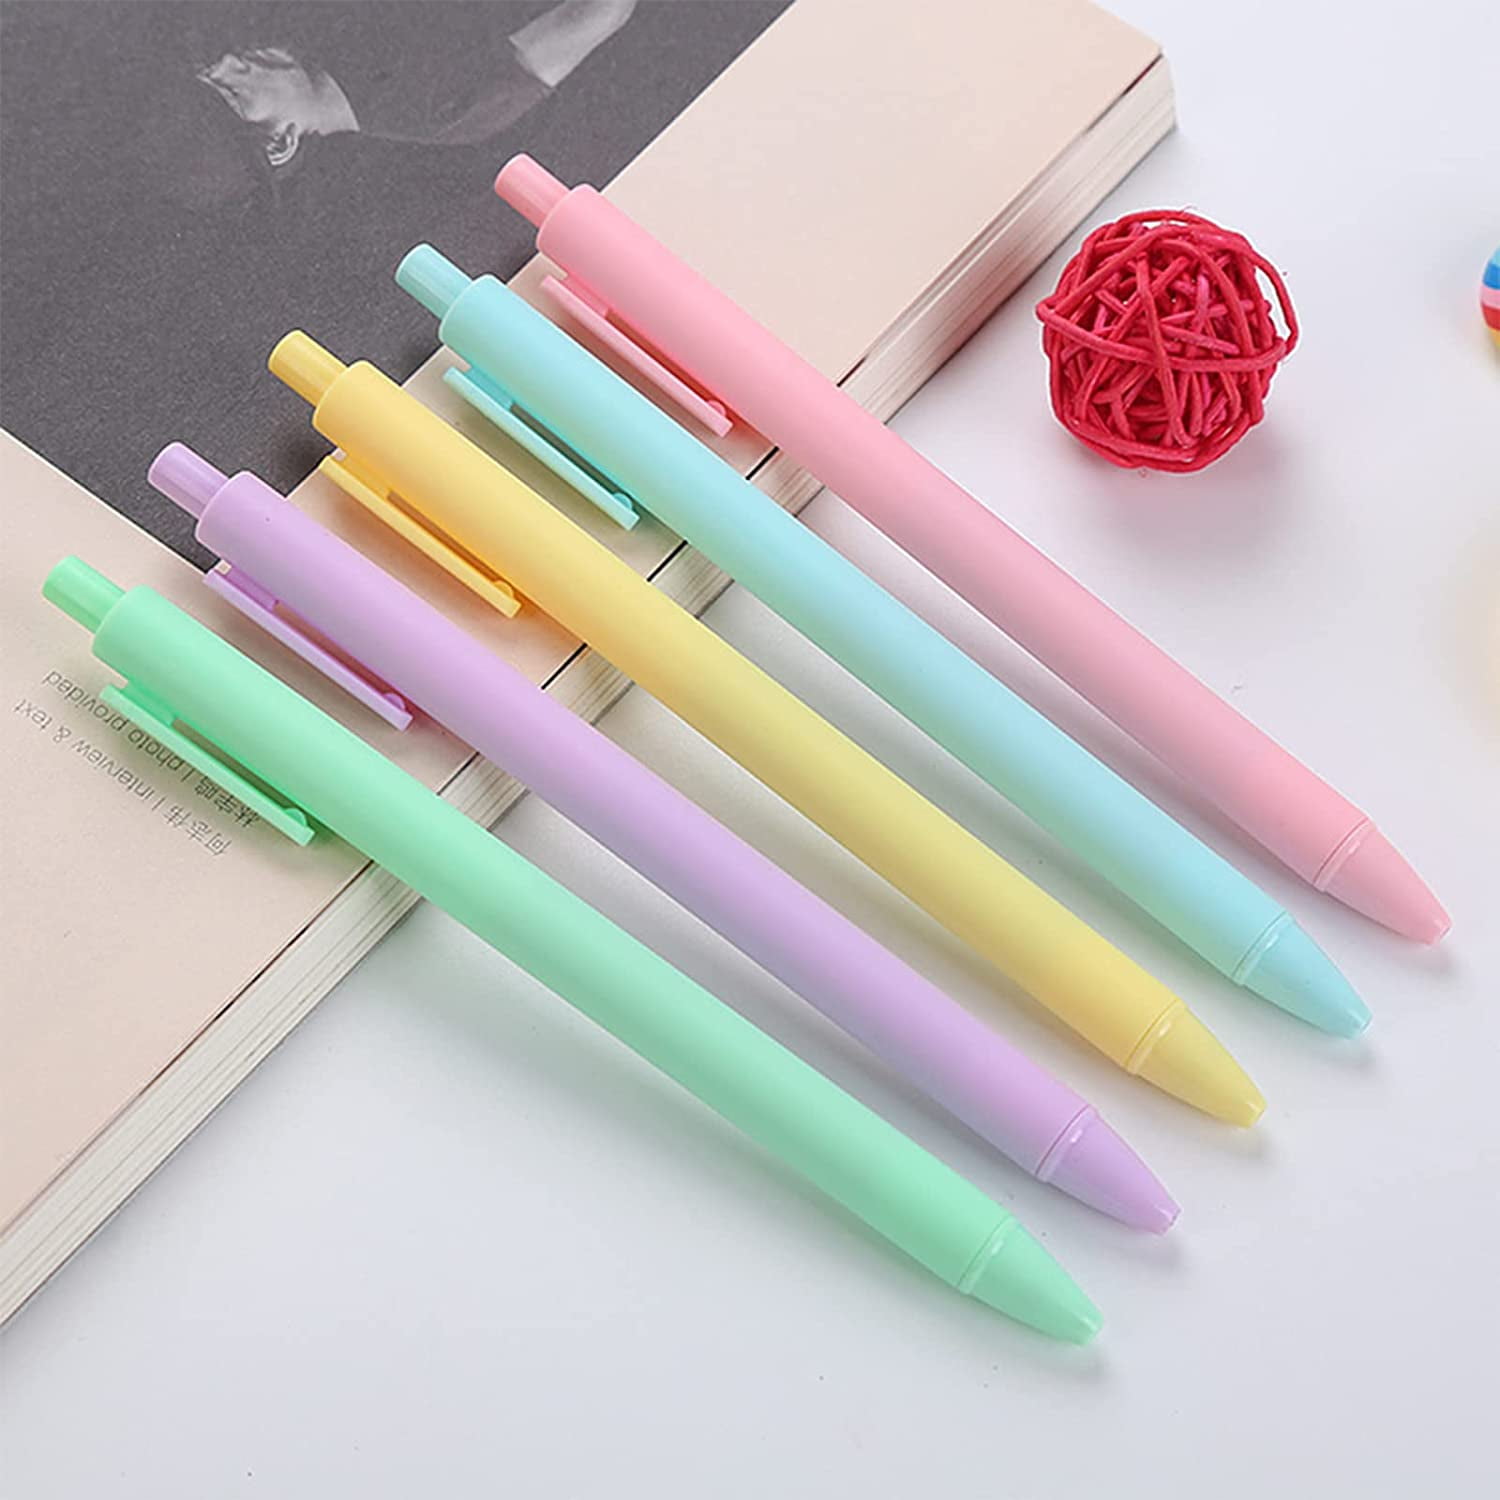 STAPENS 10 Colored Gel Ink Pens, 0.5 mm Fine Point Gel Pen with Quick Dry  Ink, Retro Ballpoint Pens for Journaling Drawing Doodling and Notetaking